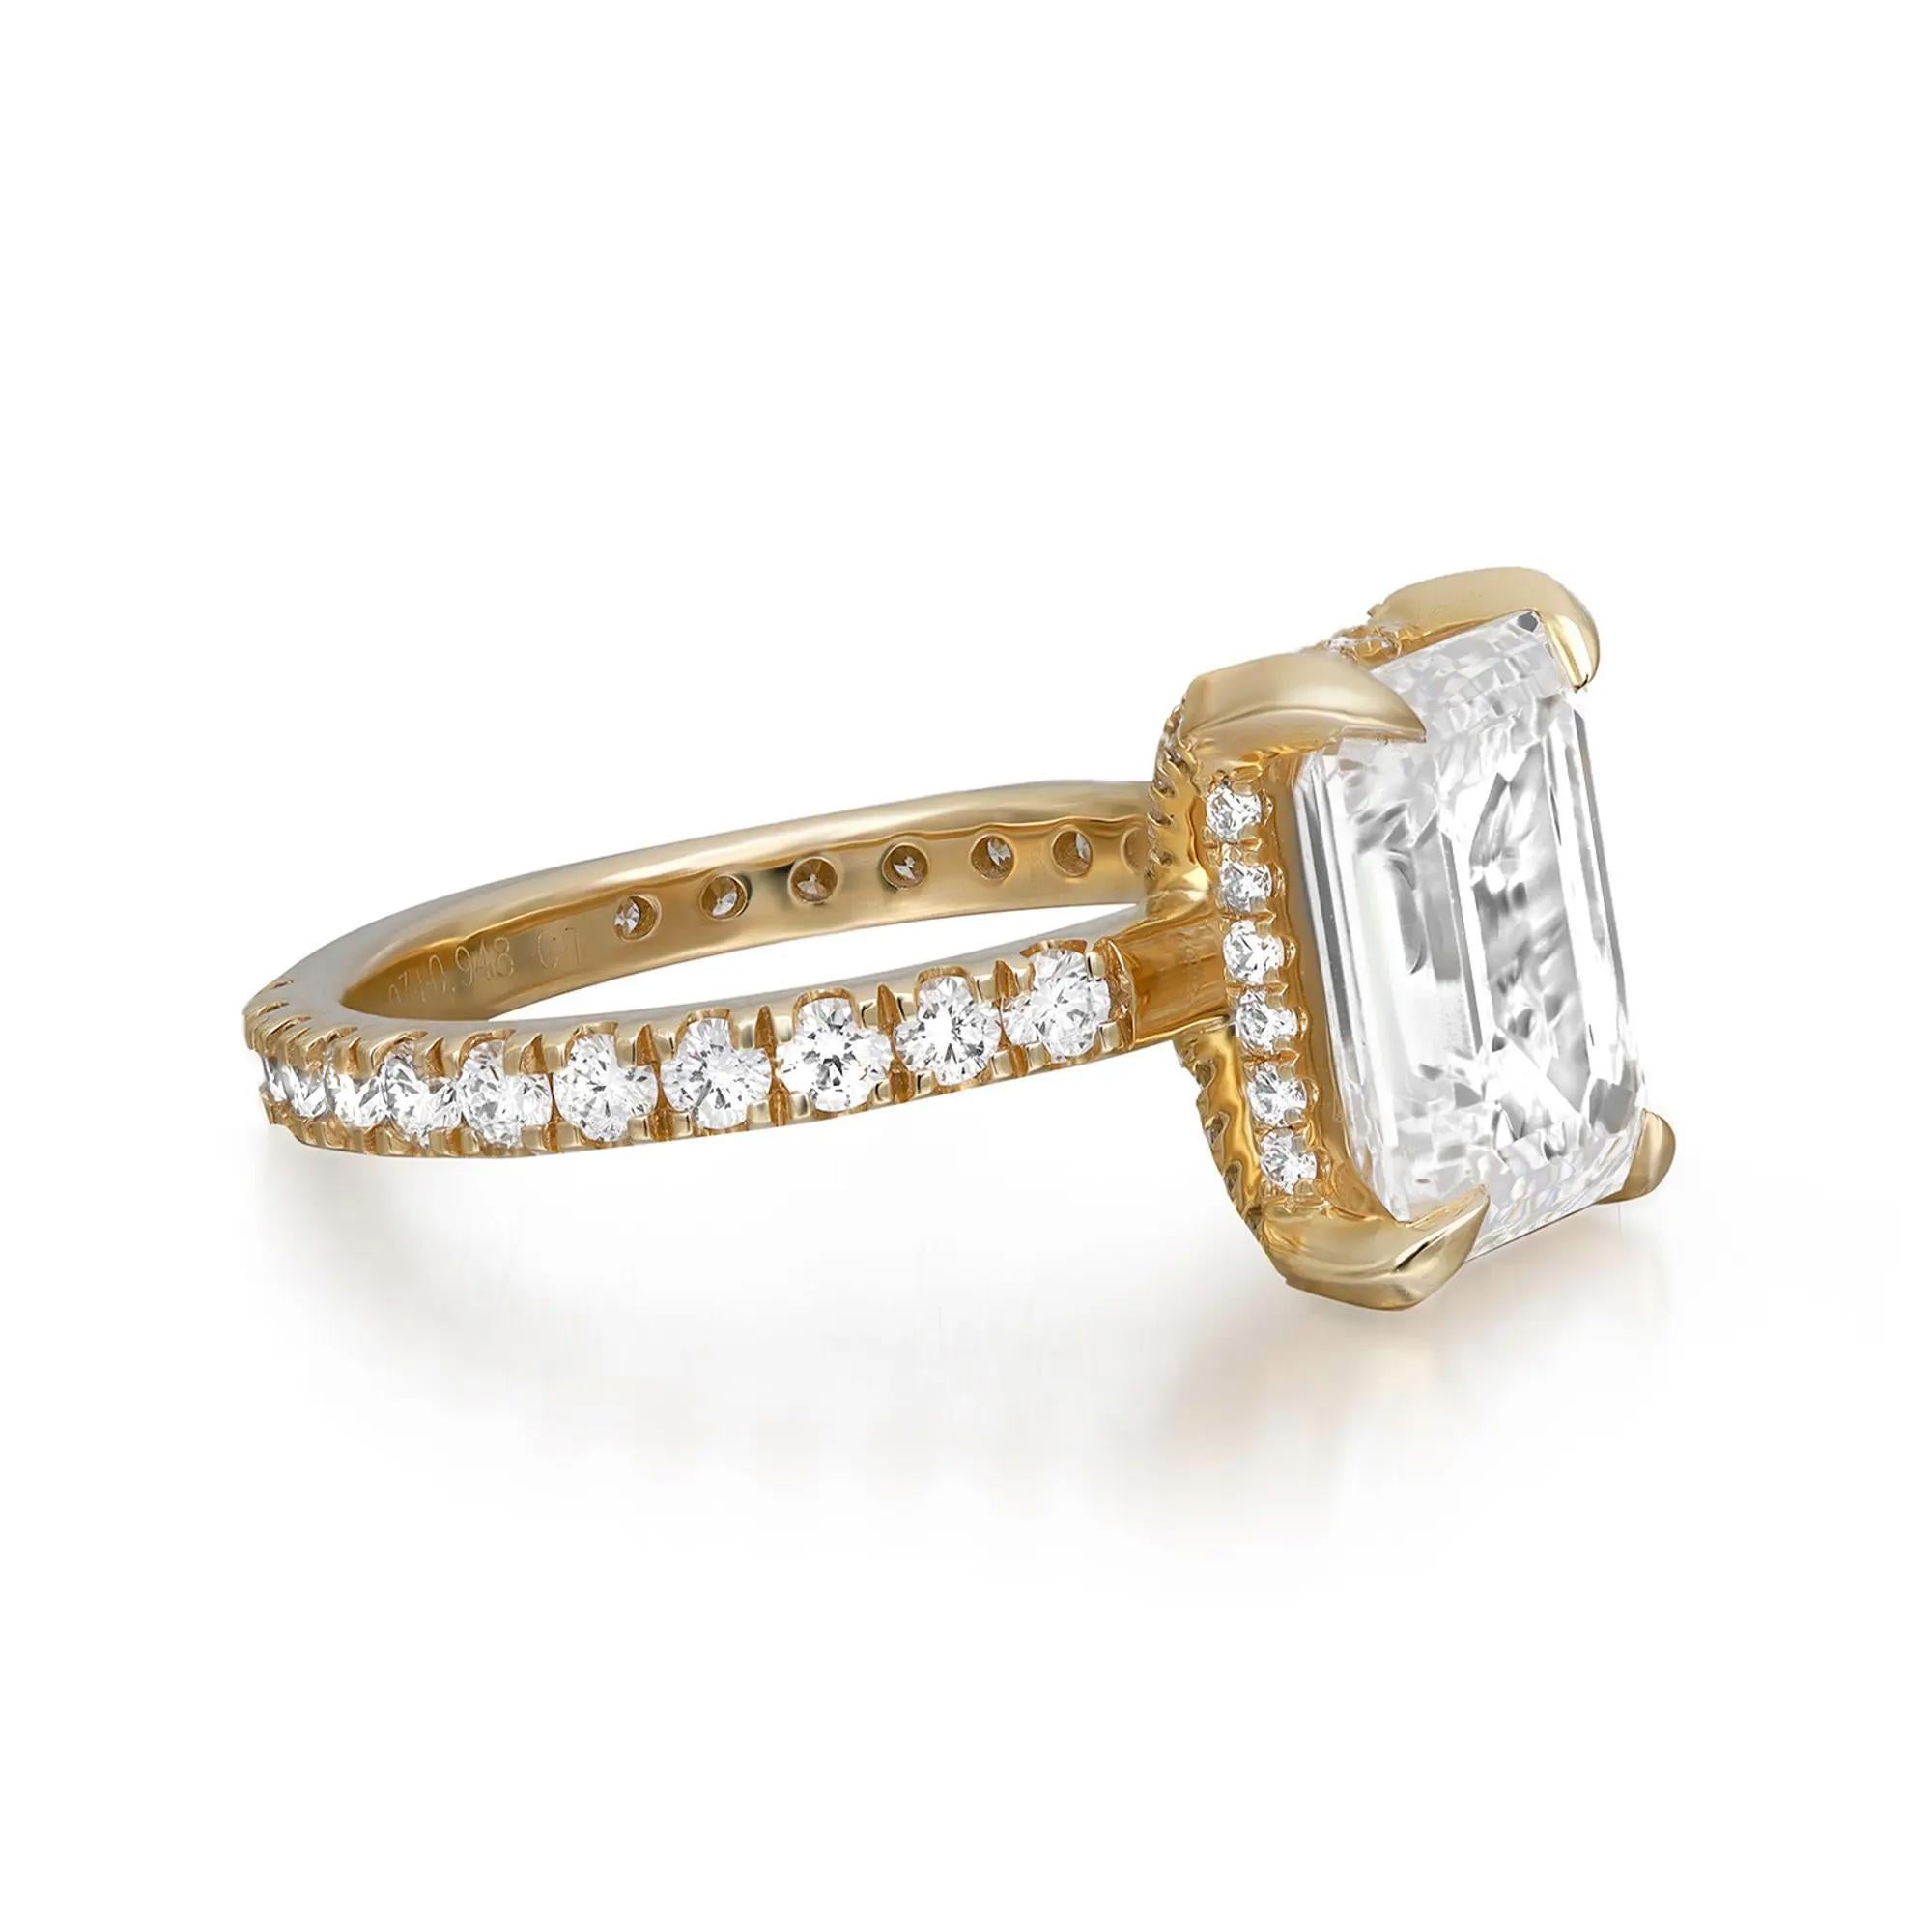 This enchanting ring is adorned with a sparkling GIA certified emerald cut lab grown diamond in the center, secured firmly in a beautiful four prong setting and a classic diamond shank that lends the final touch to the design aesthetic. The total